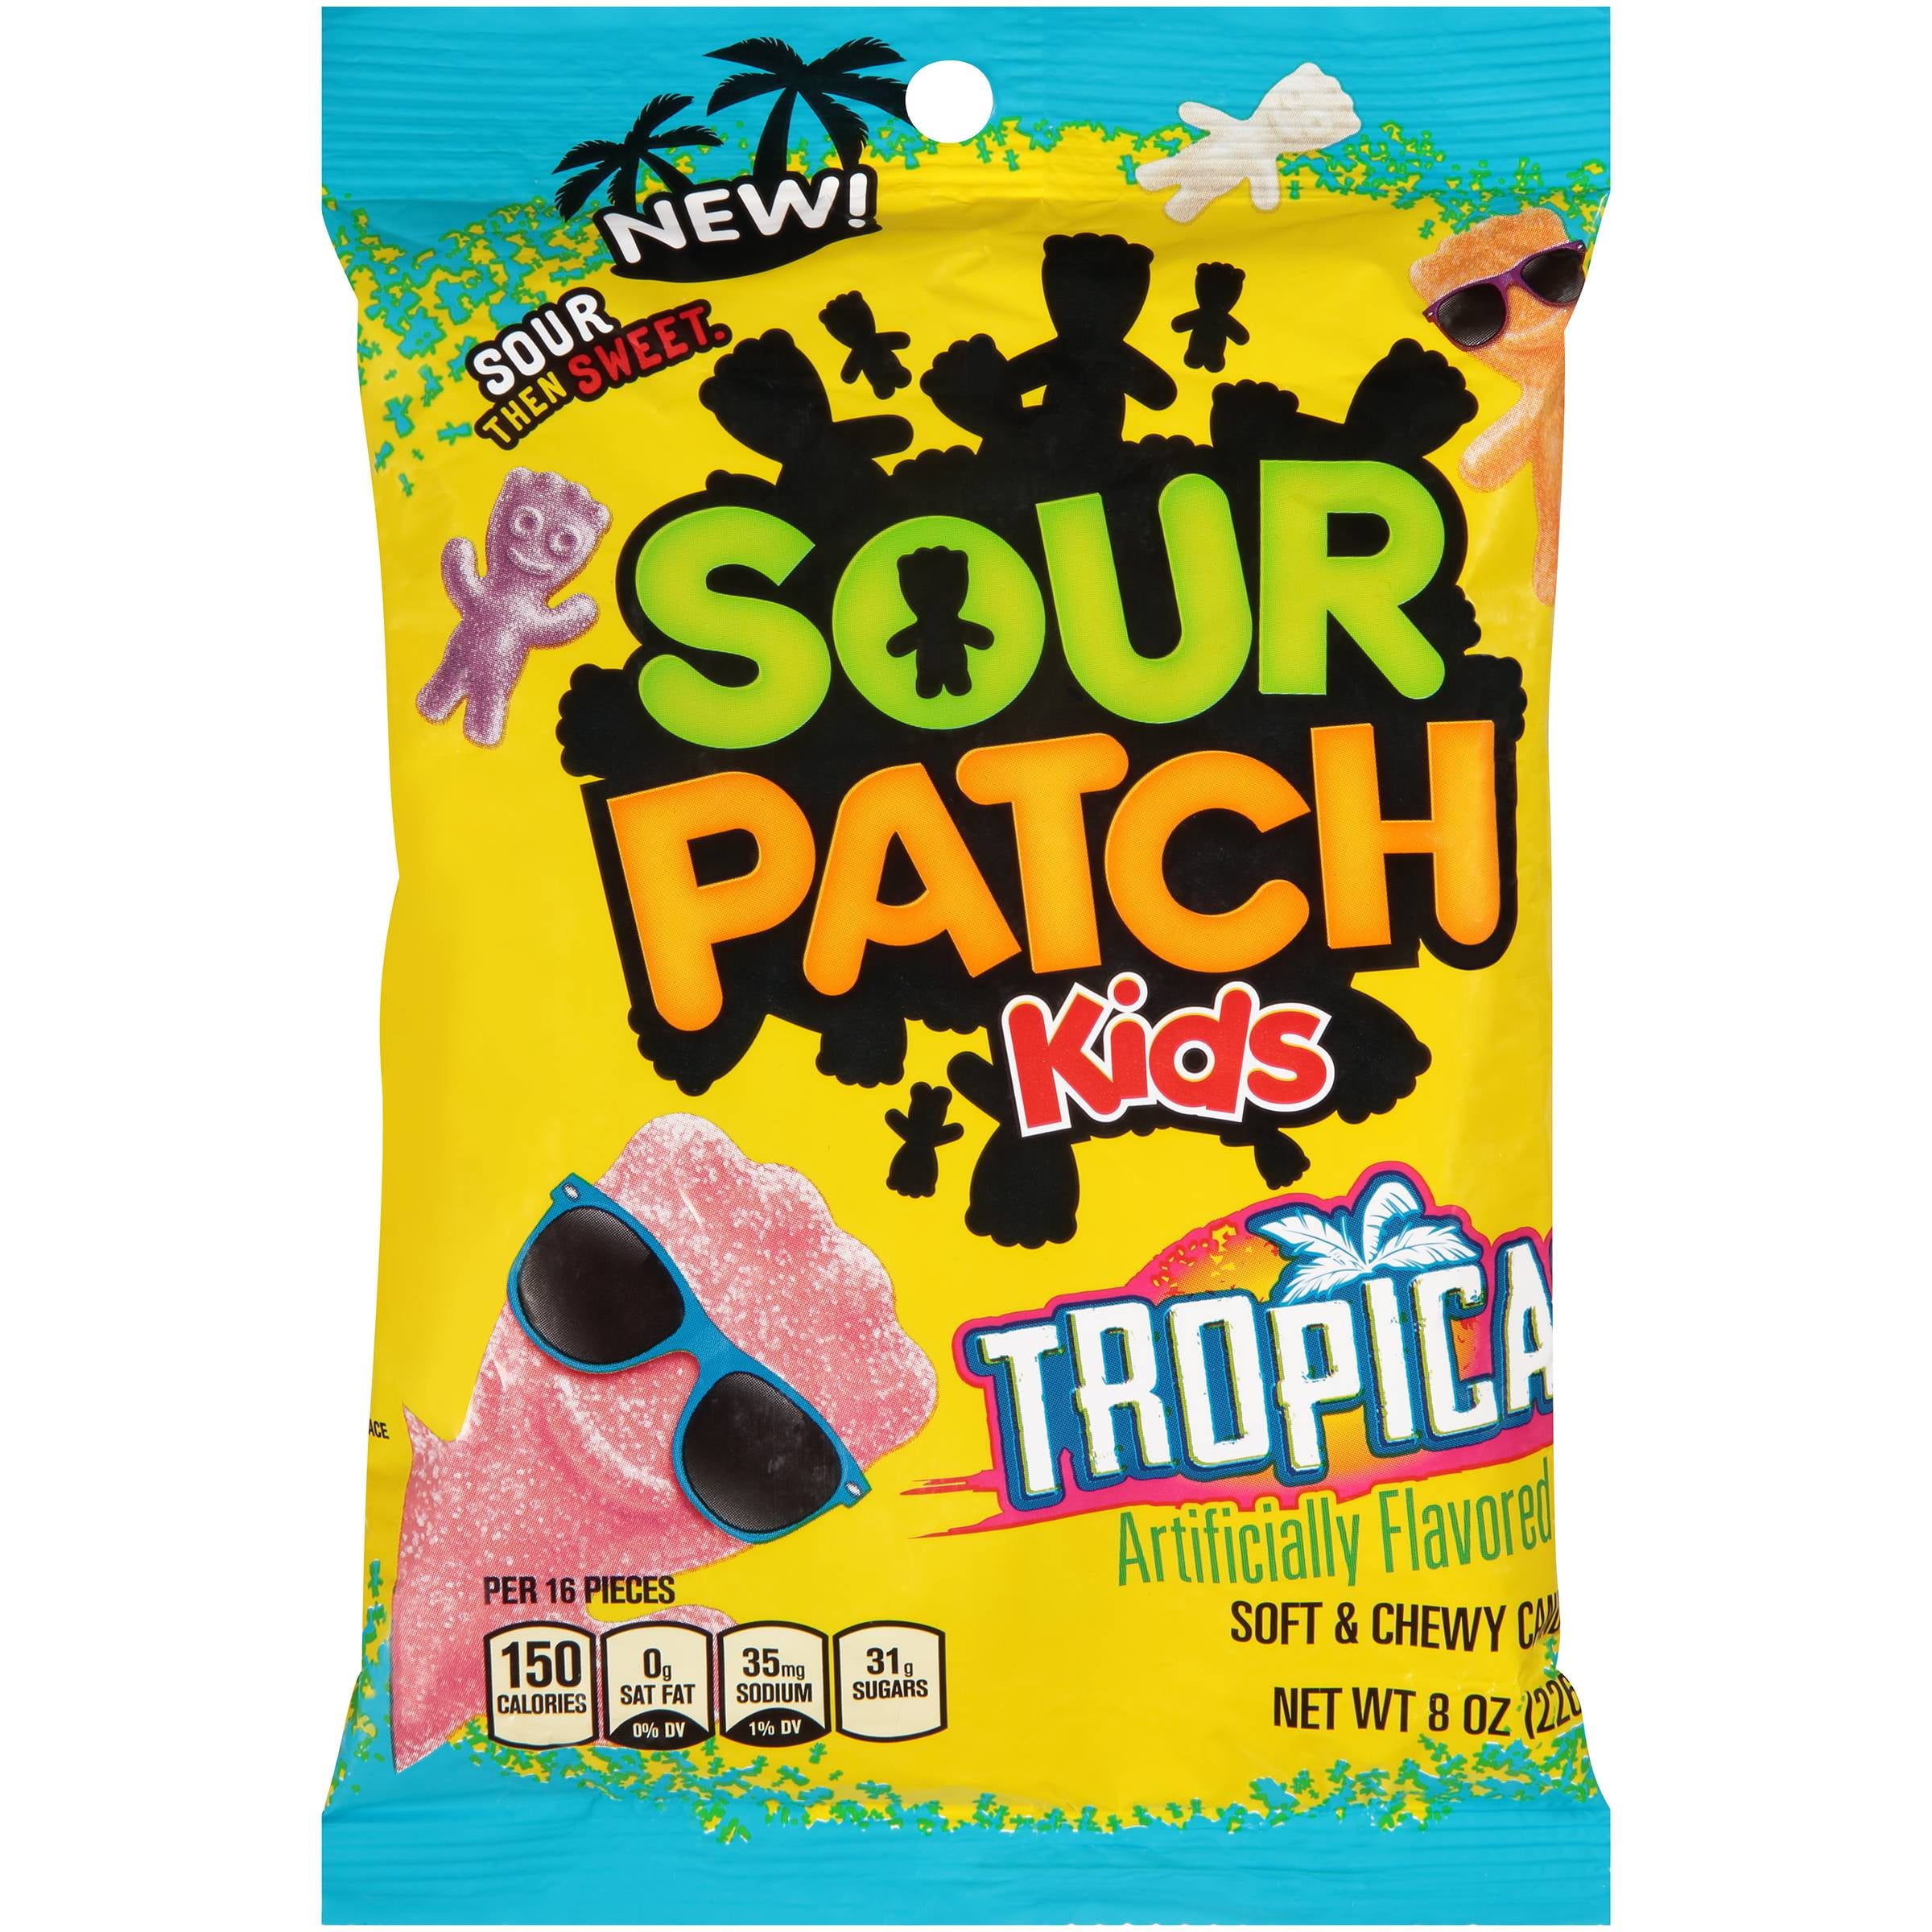 Sourpatch lyds